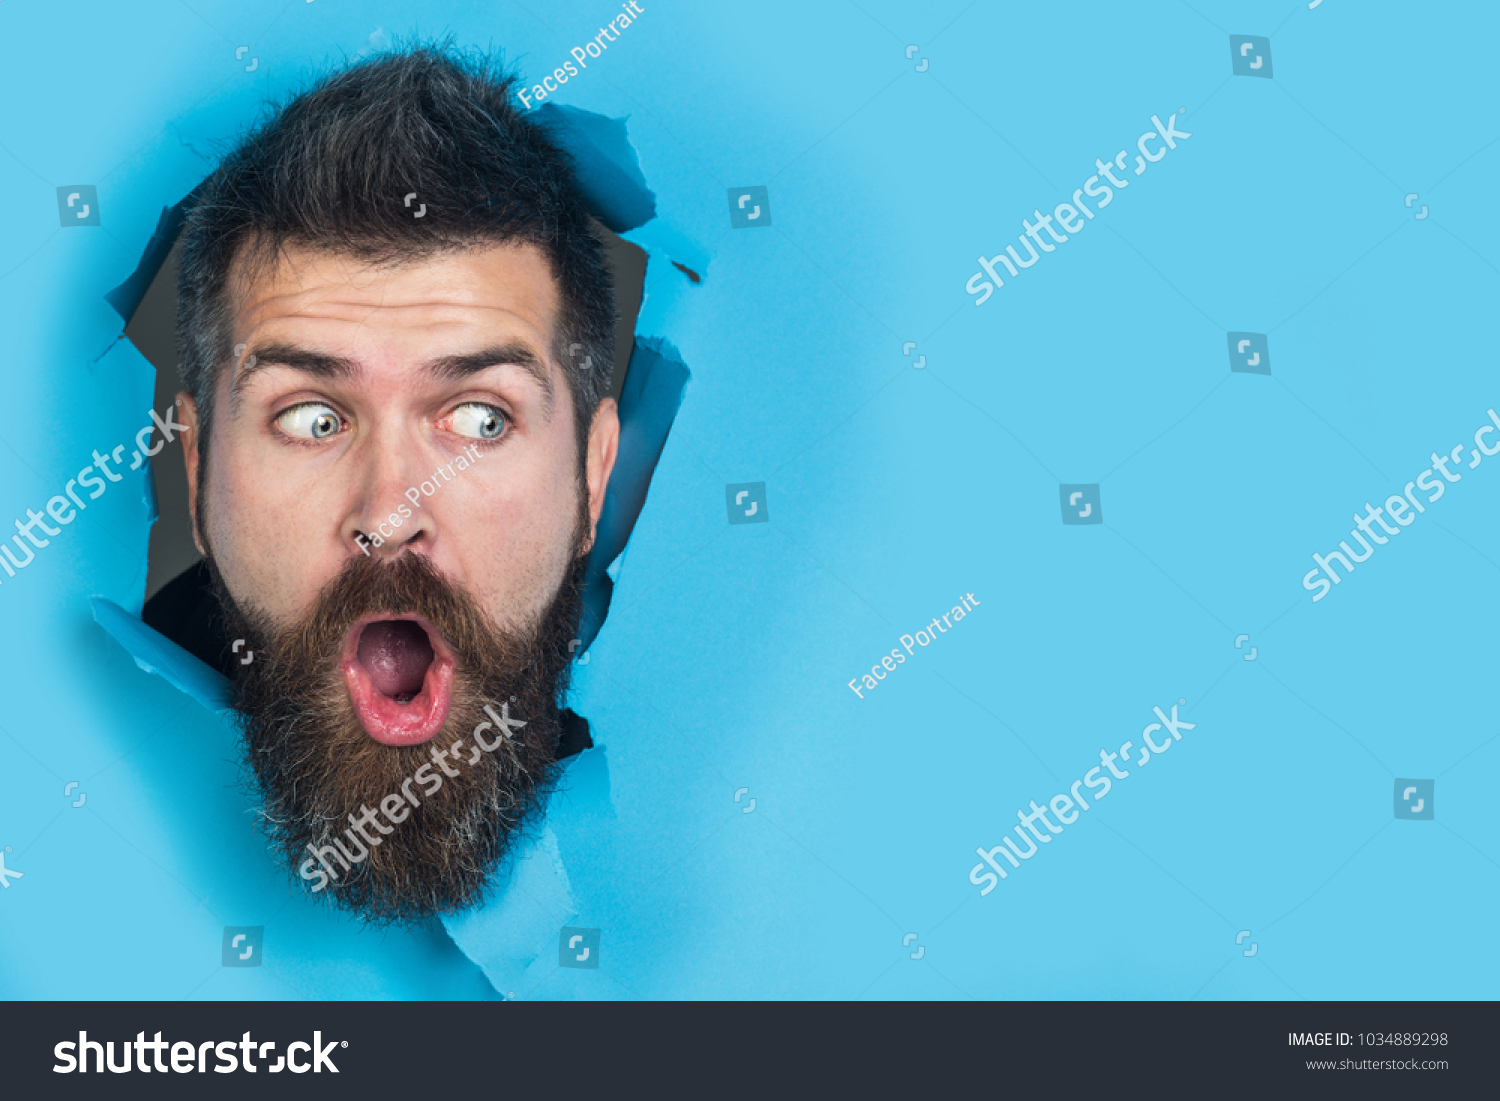 View of male face through hole in blue paper. Surprised bearded man making hole in paper. Copy space for advertising, to insert text or slogan. Discount, sale, season sales. #1034889298